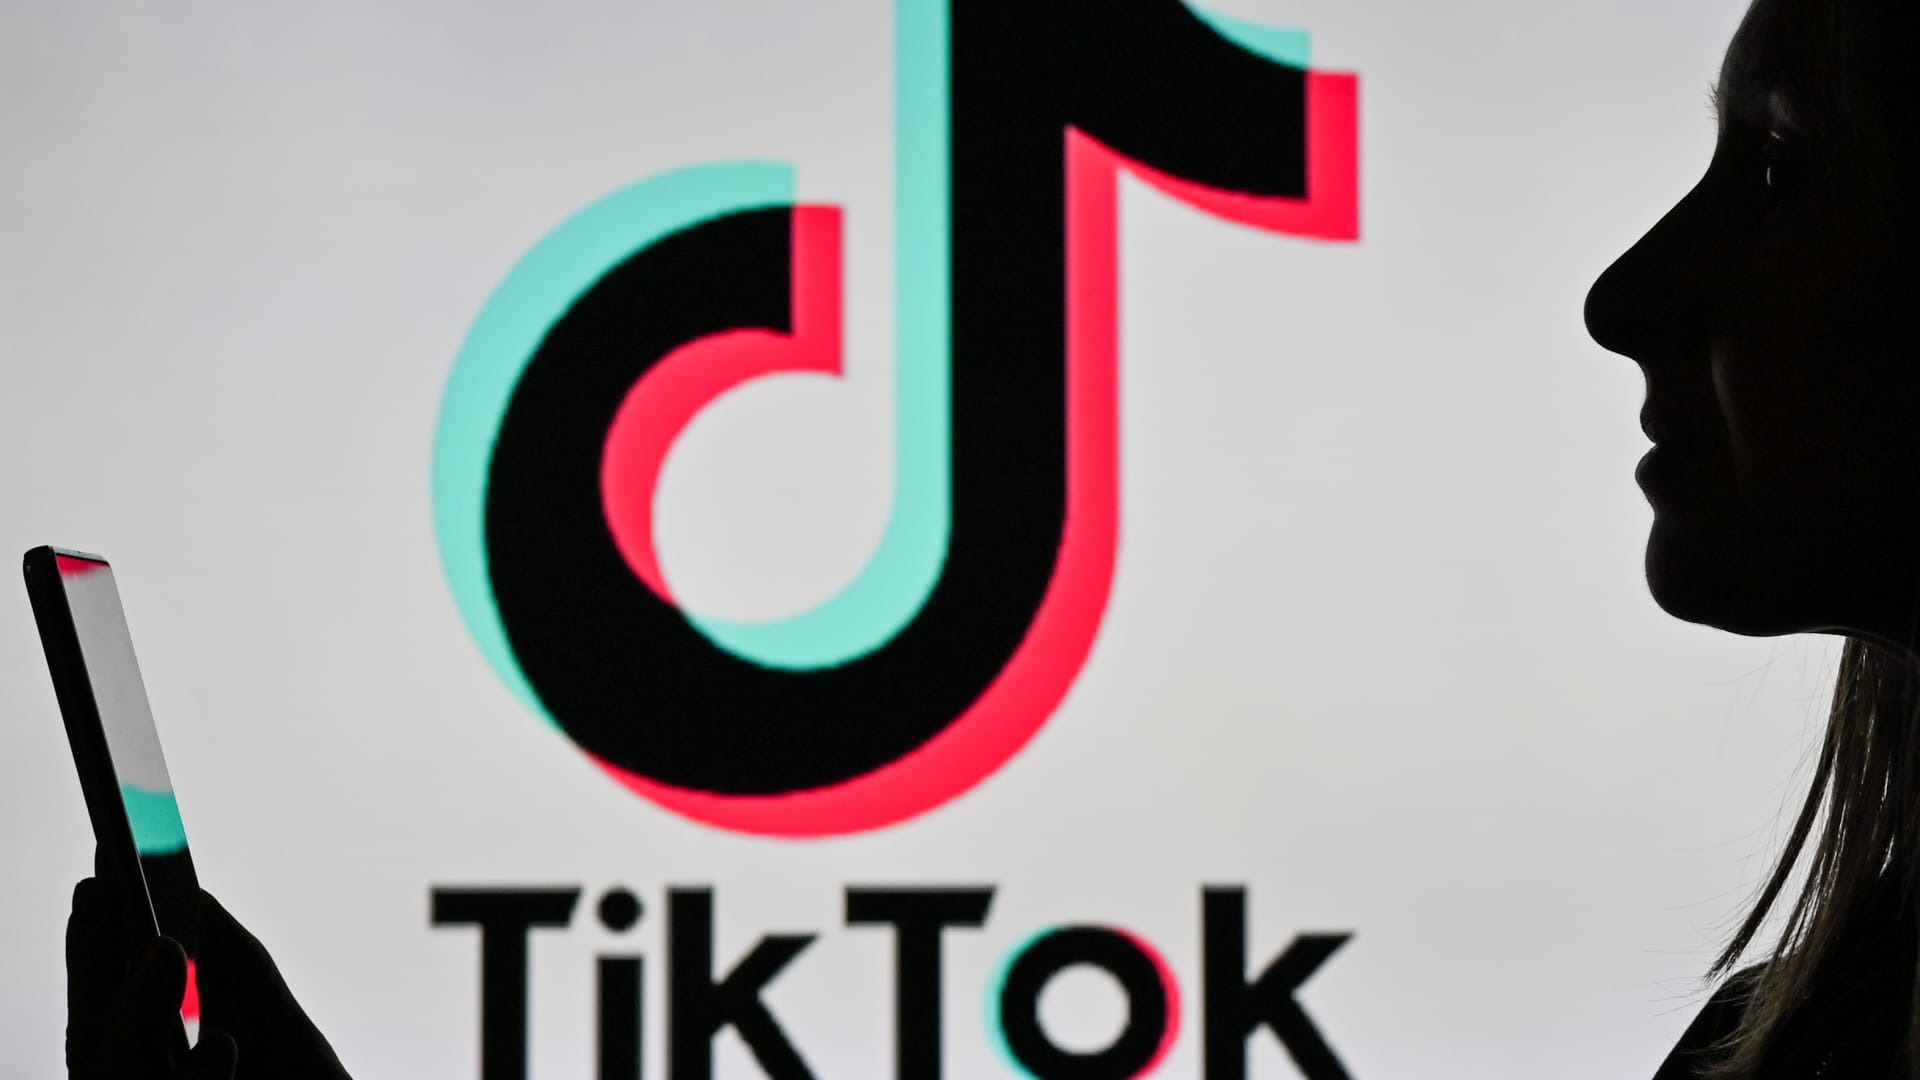 TikTok owner ByteDance explores self-designed chips as China aims for semiconduc..